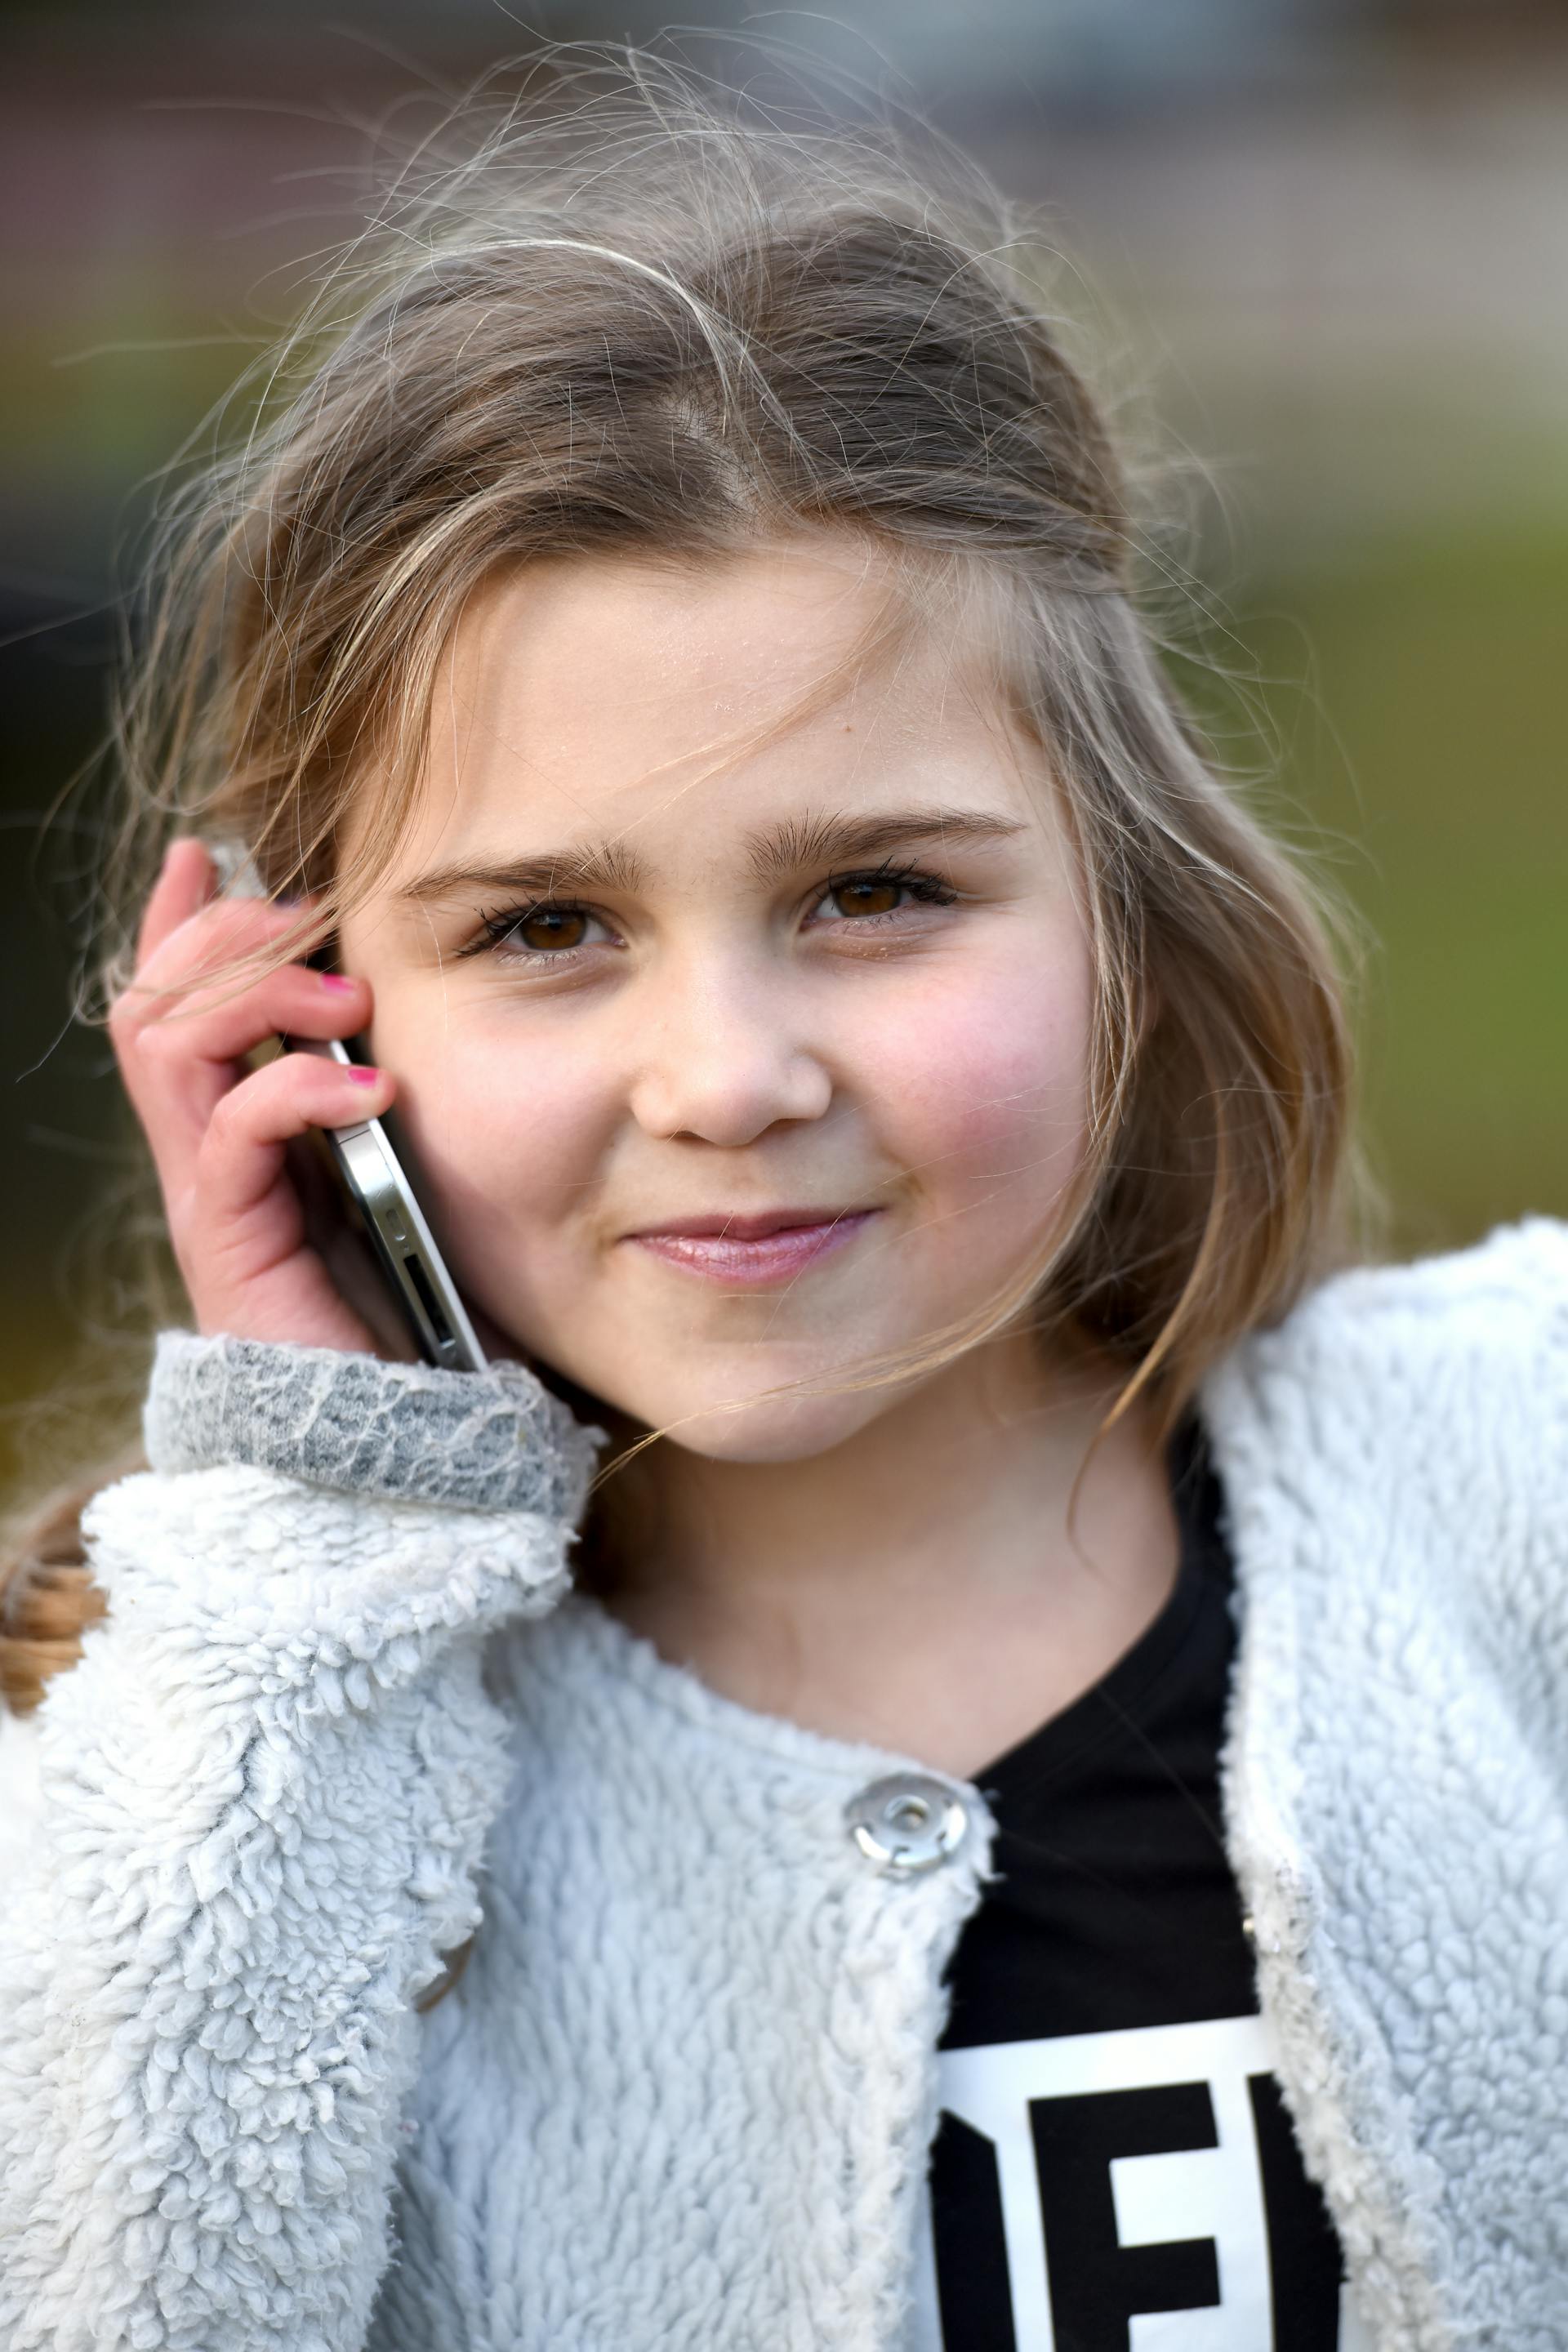 A little girl talking on the phone | Source: Pexels